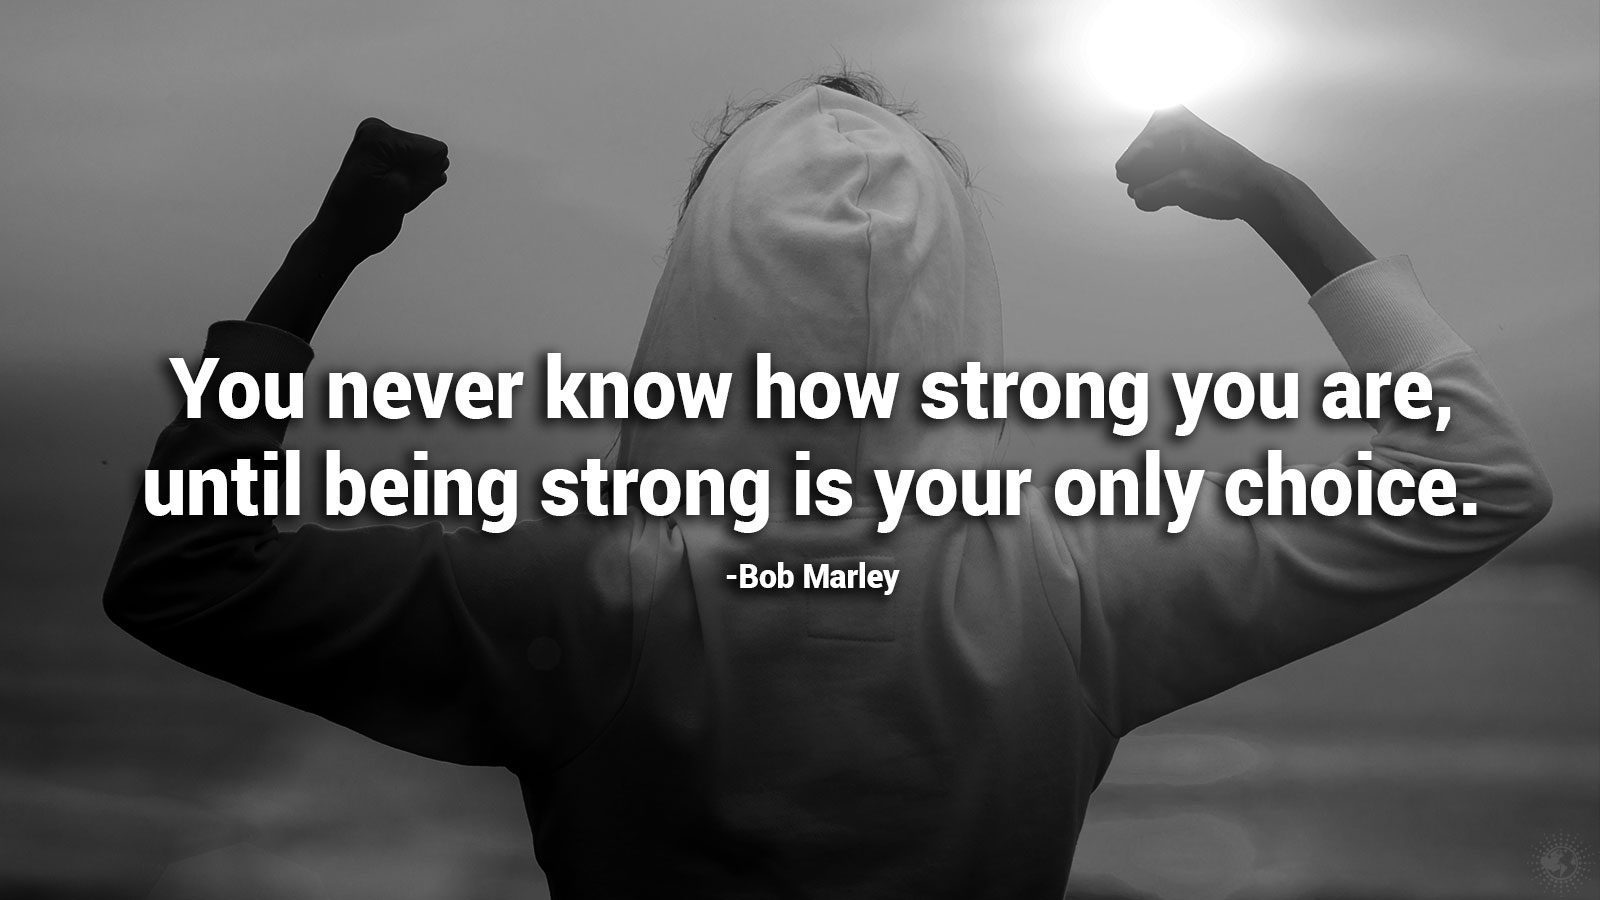 15 Quotes About Strength to Help Through Hard Times